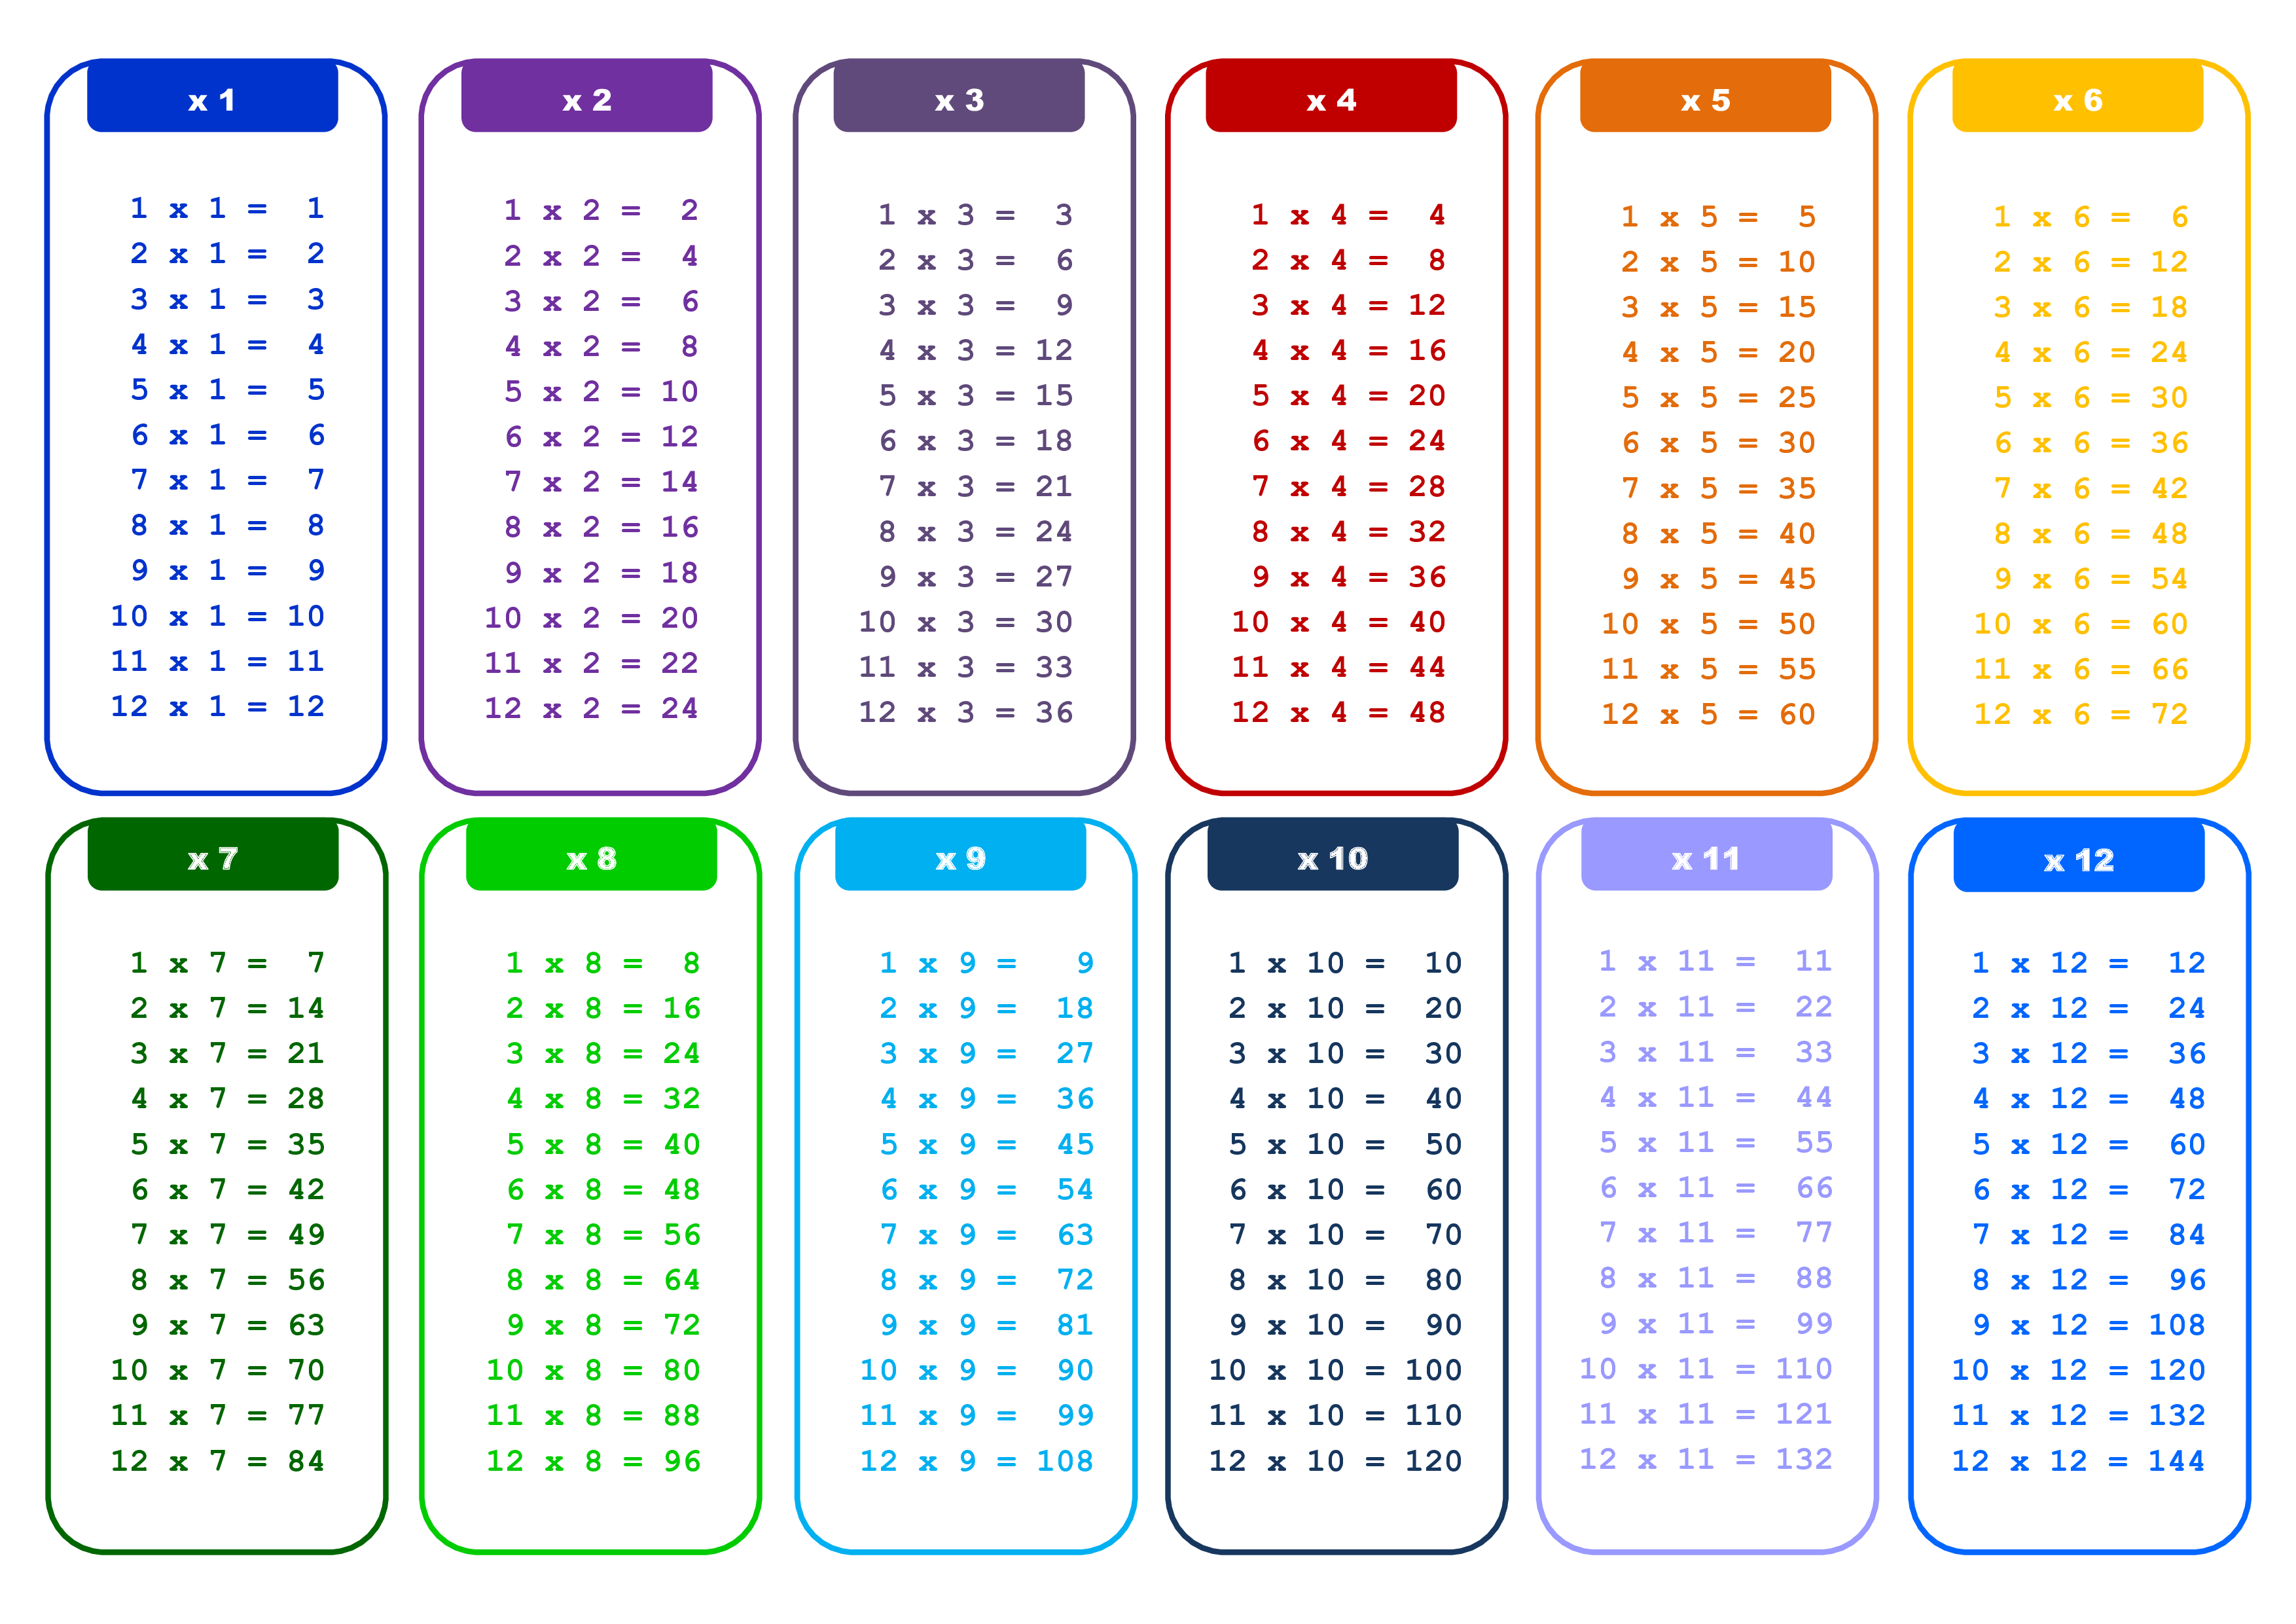 7 times table chart up to 20